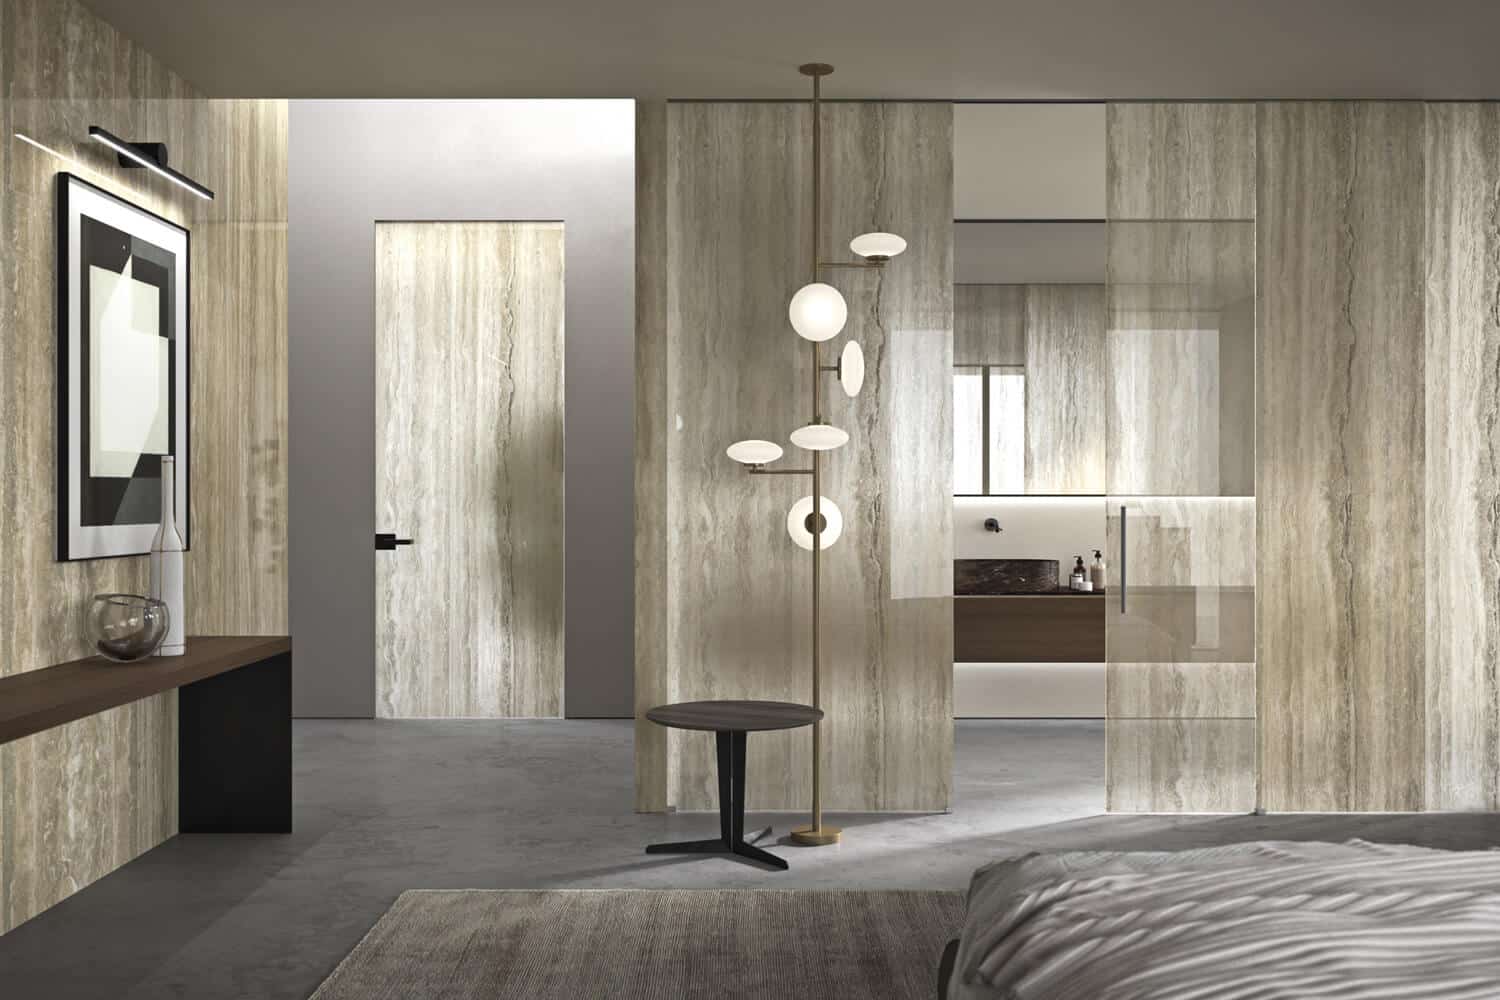 Travertino marbling decoration. The frosted glass (swing door on the left) provides more privacy compared to the choice of clear glass (sliding door to the right), which allows for a see-through effect even with the decoration. 